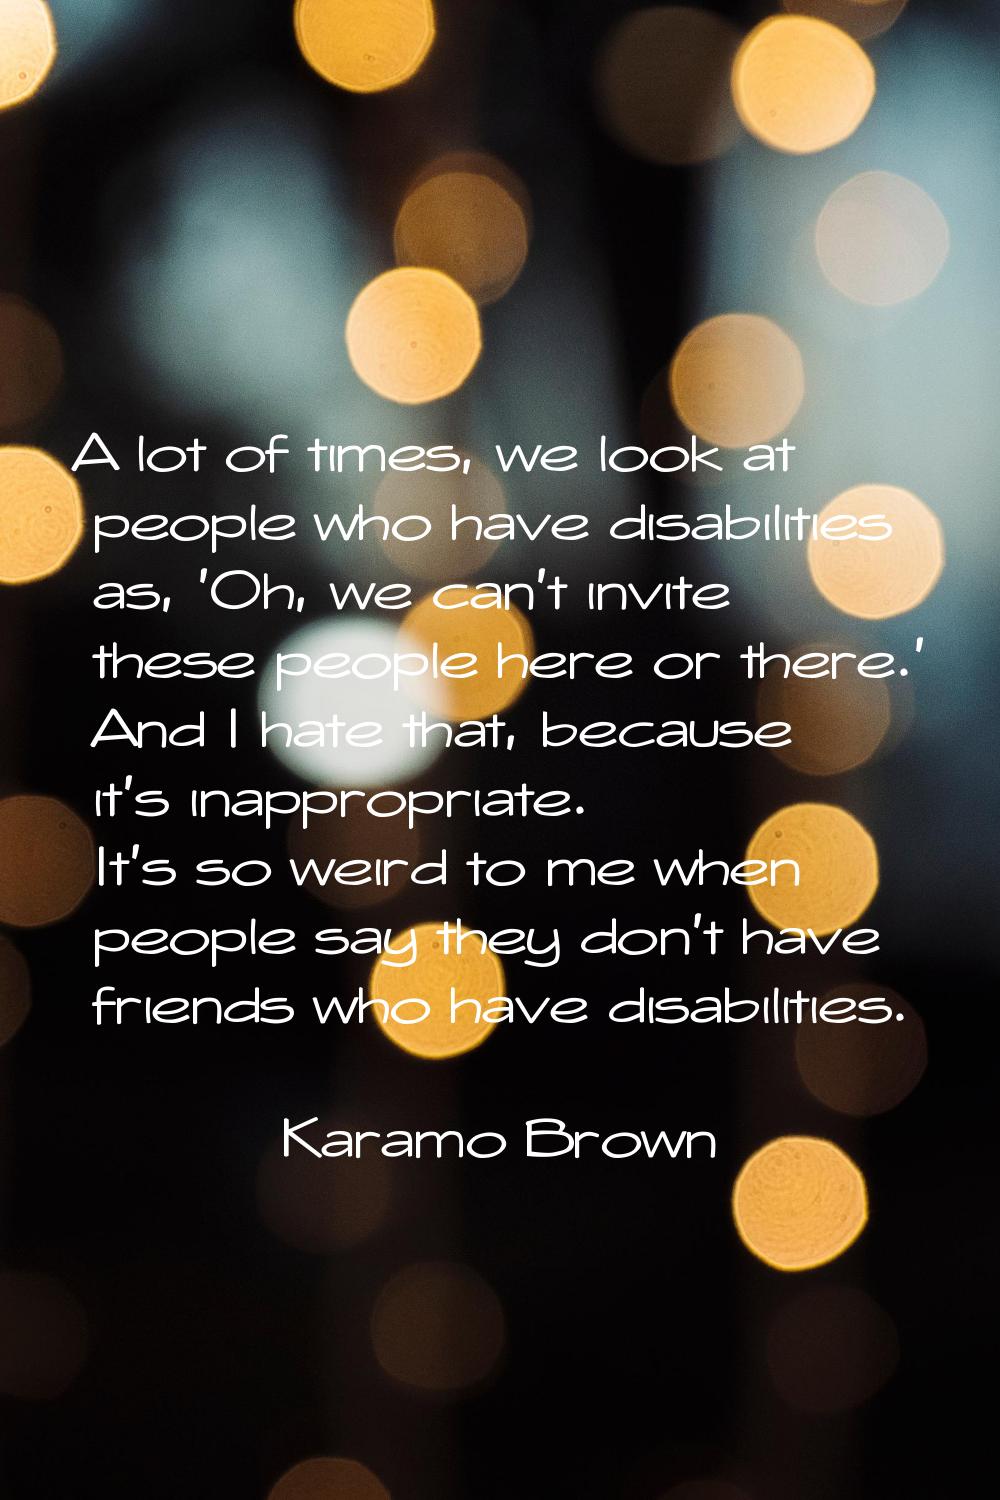 A lot of times, we look at people who have disabilities as, 'Oh, we can't invite these people here 